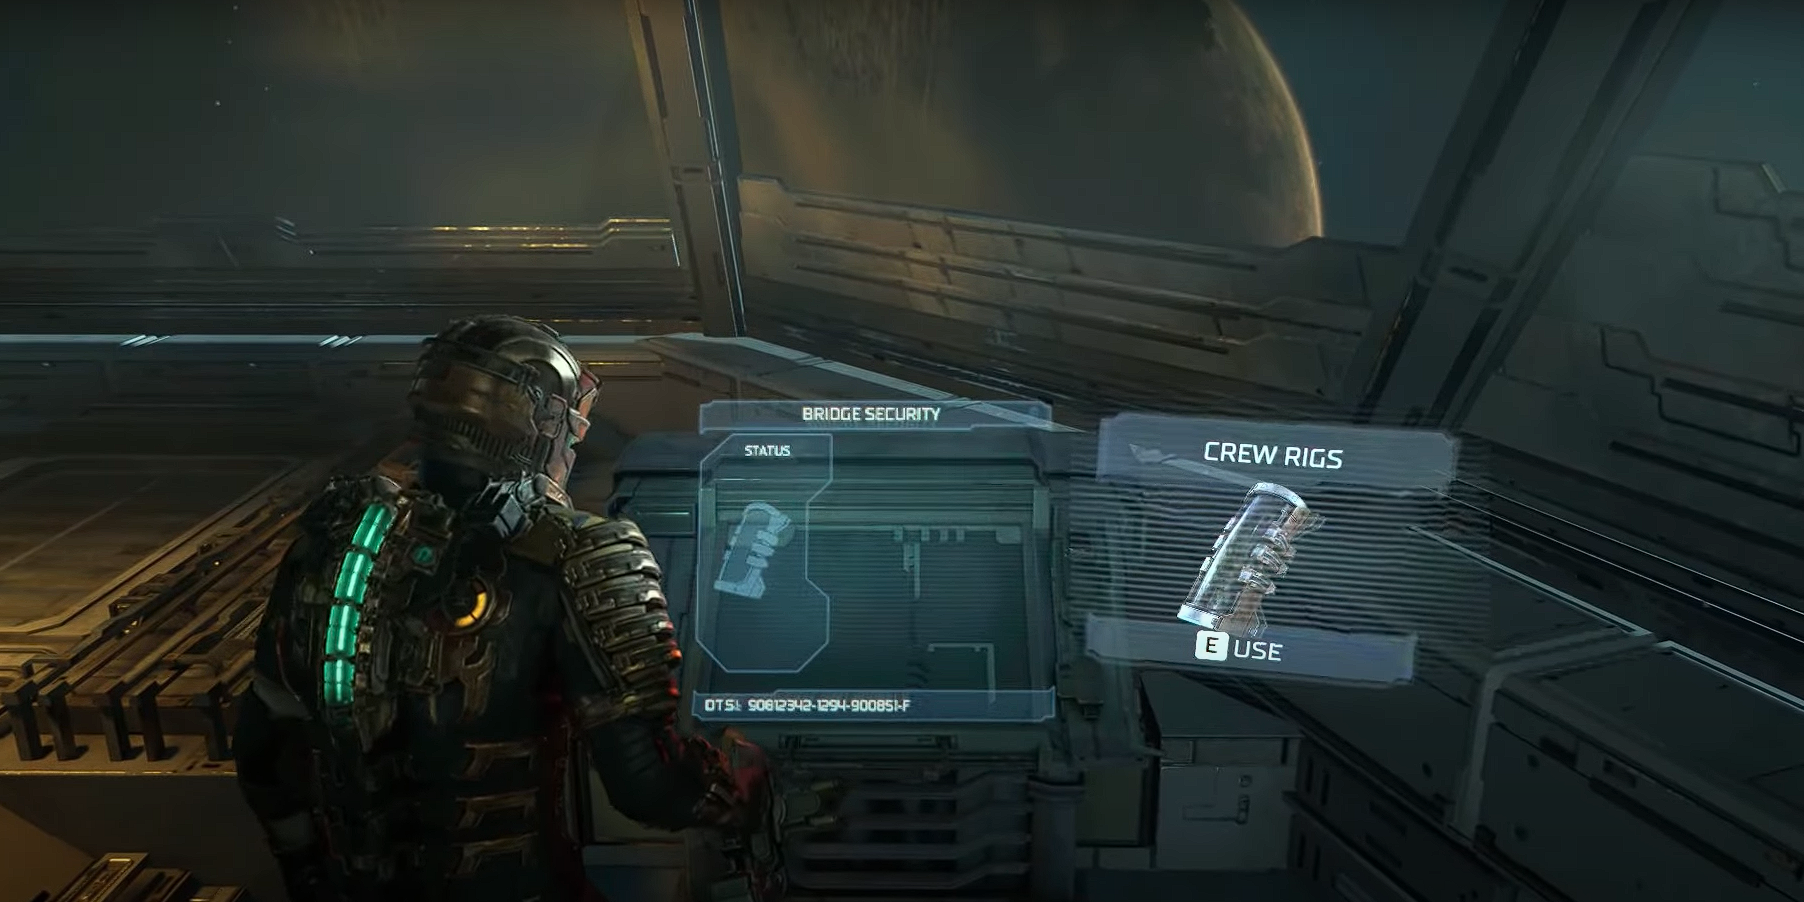 How To Complete The You Are Not Authorized Side Quest in Dead Space Remake